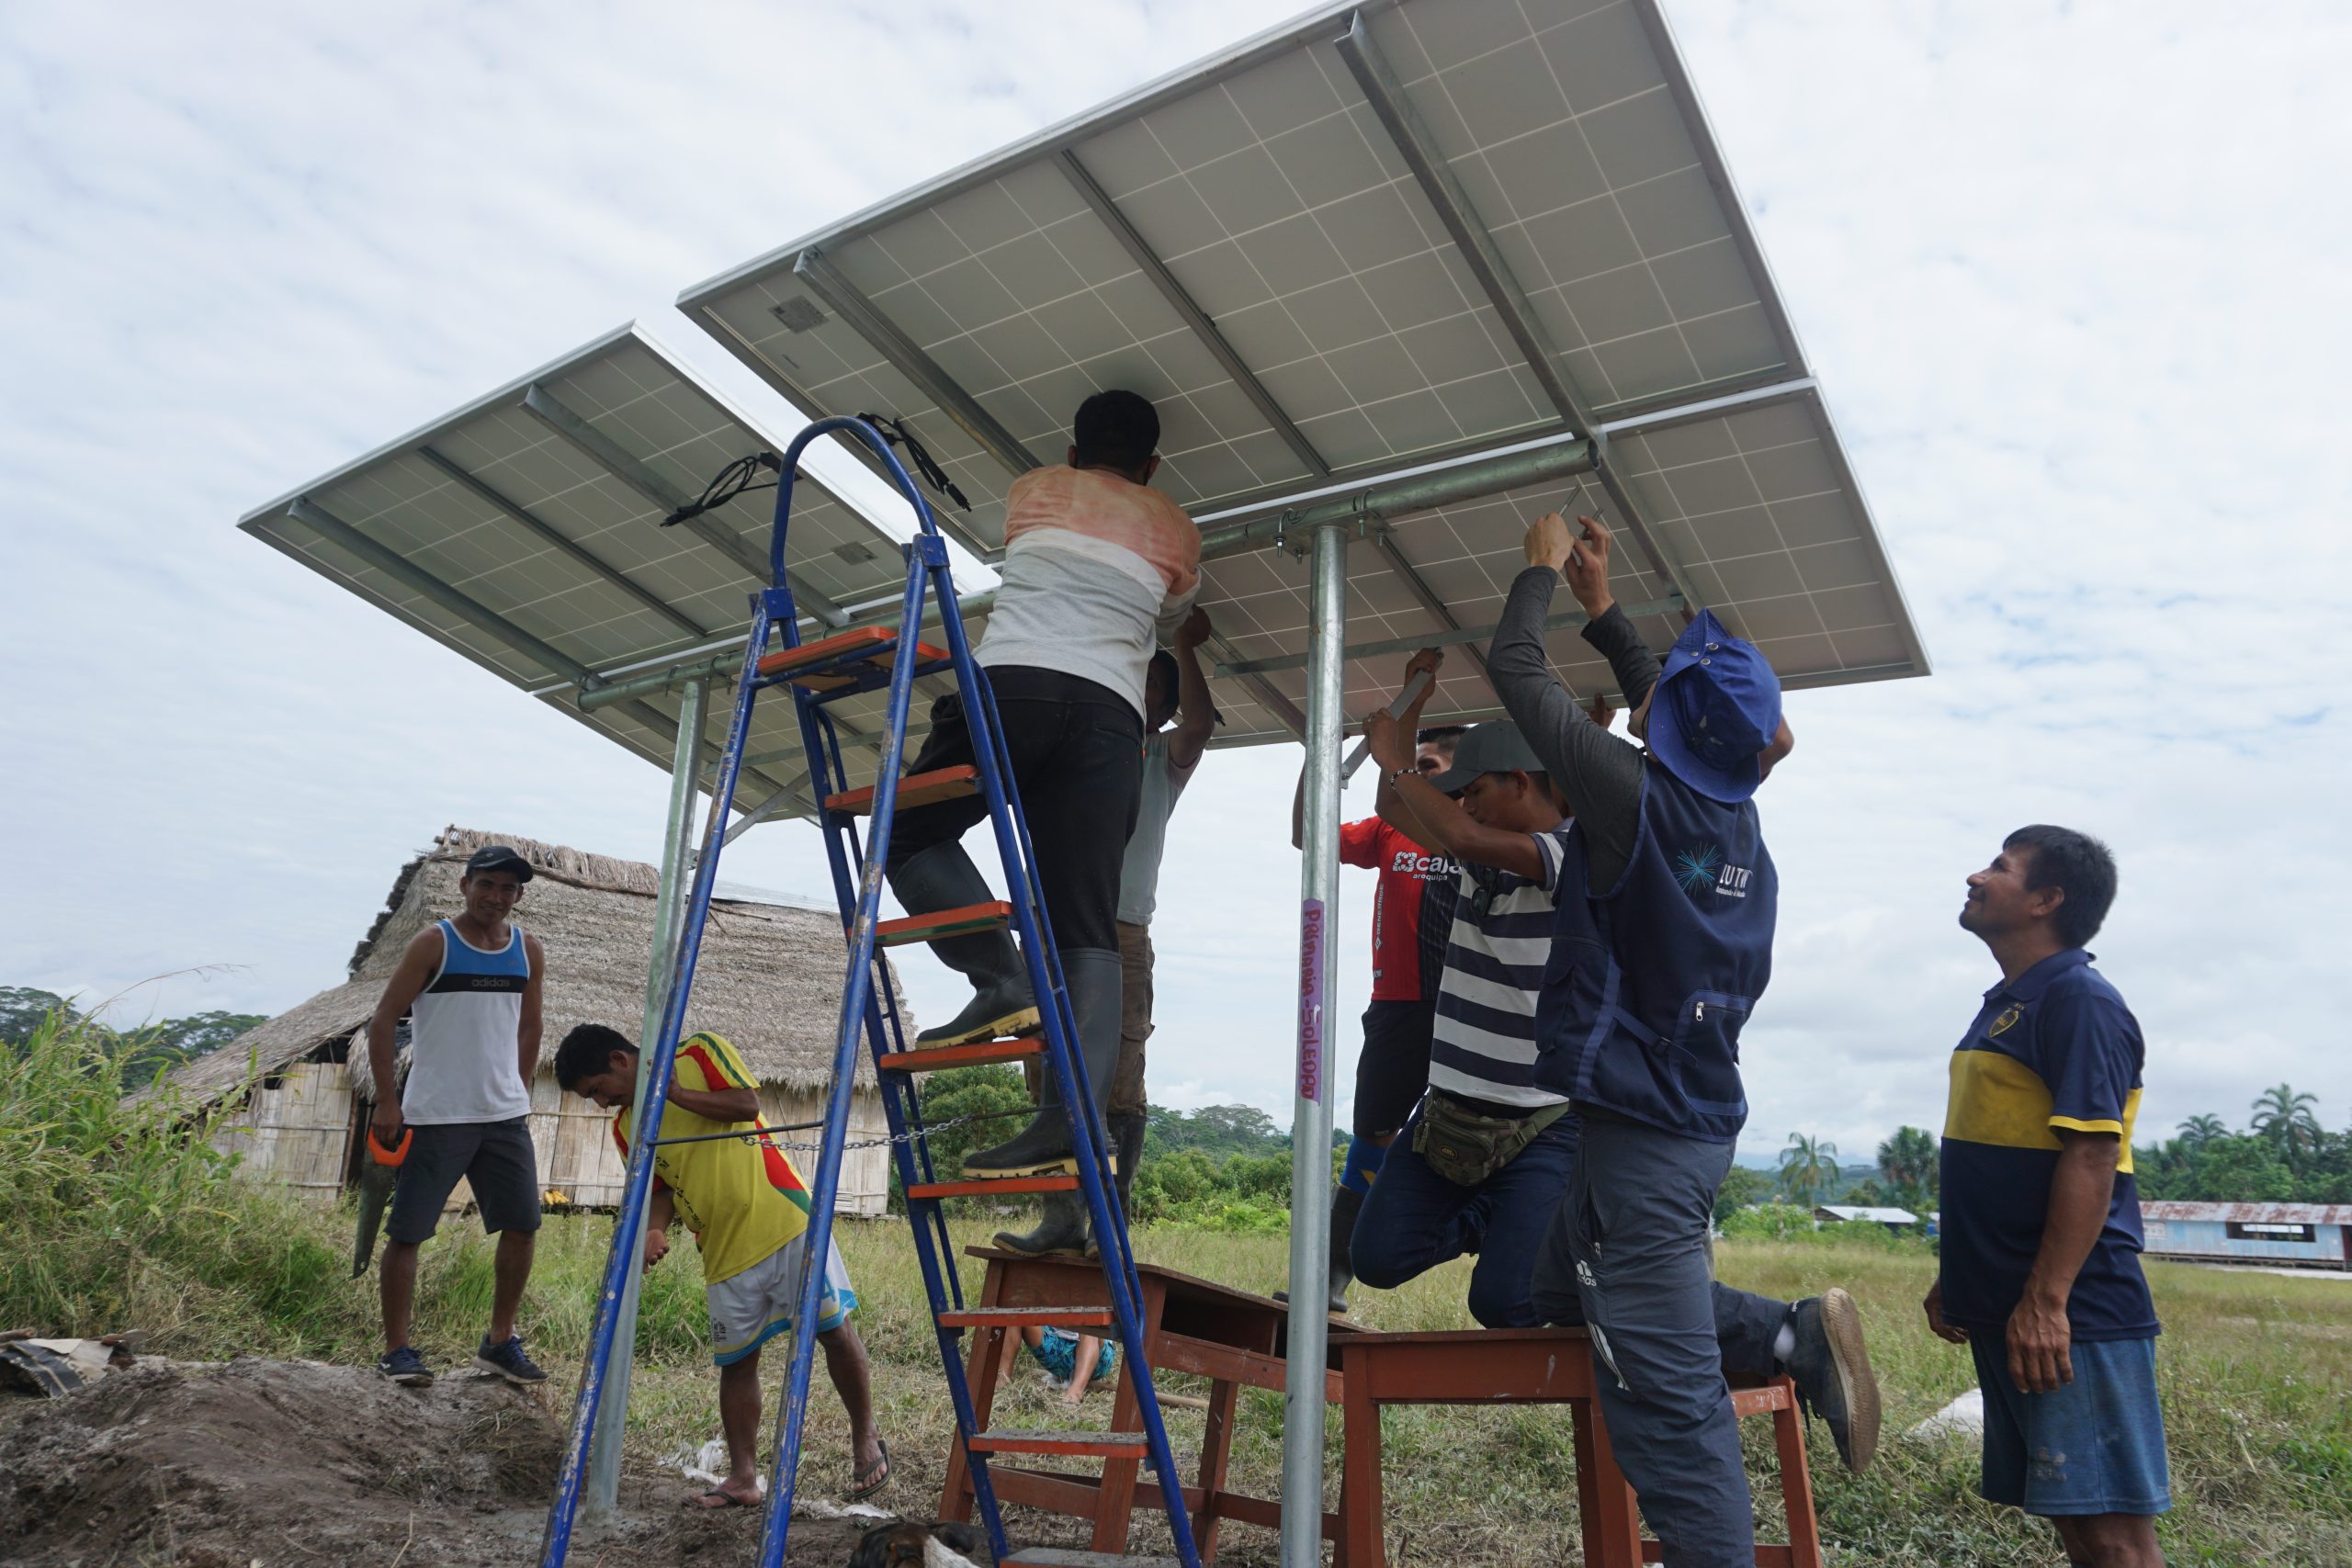 People work on the installation of a solar panel in a community in the Peruvian Amazon